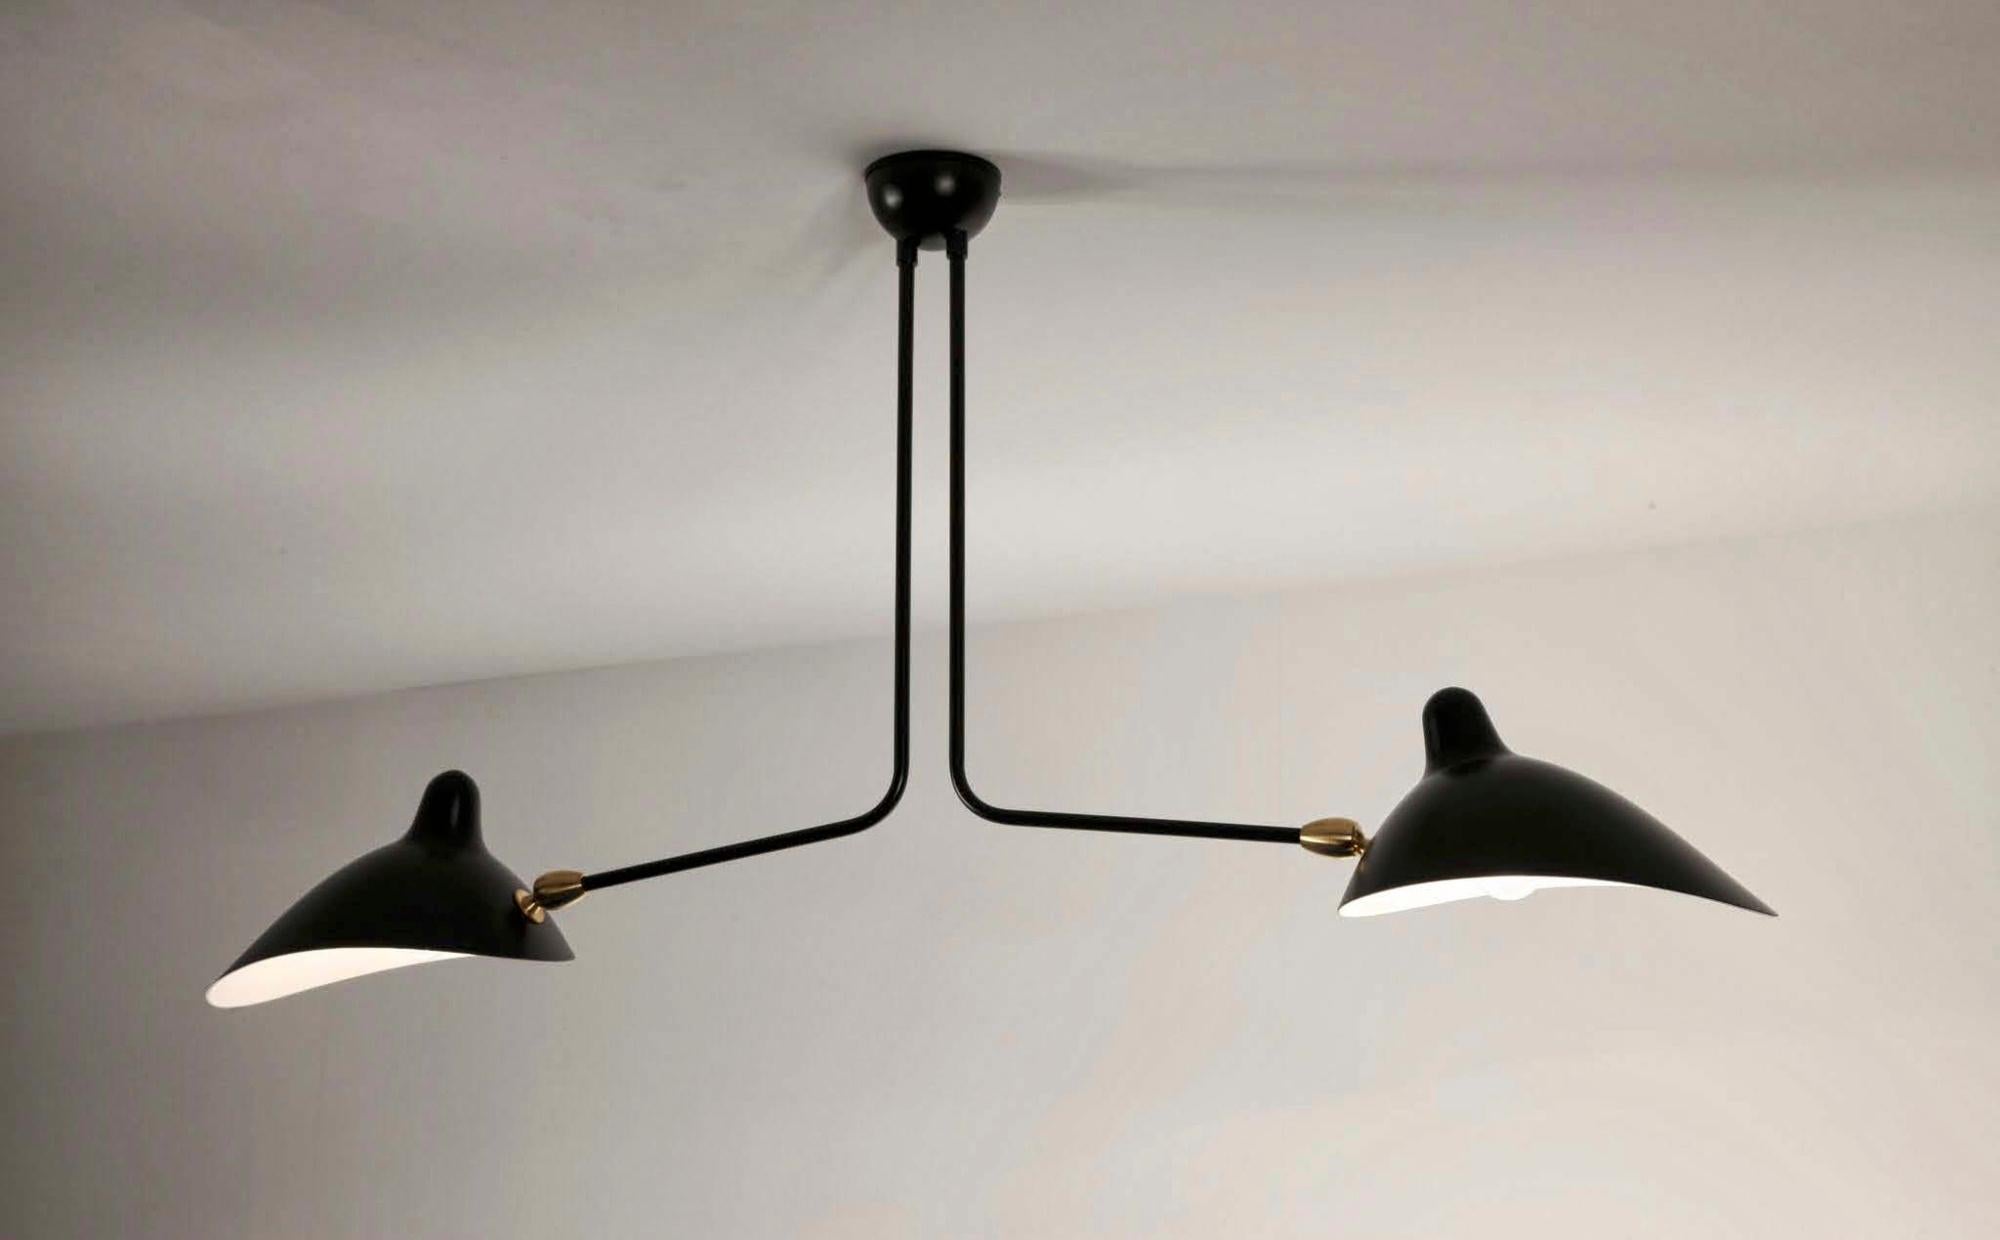 Simple and unique this ceiling lamp has two symmetrical curved arms which are fixed, with shades that can be rotated to any position. An elegant lamp with a small footprint that gives character to any room. 

Available in black or white.

WHAT SETS